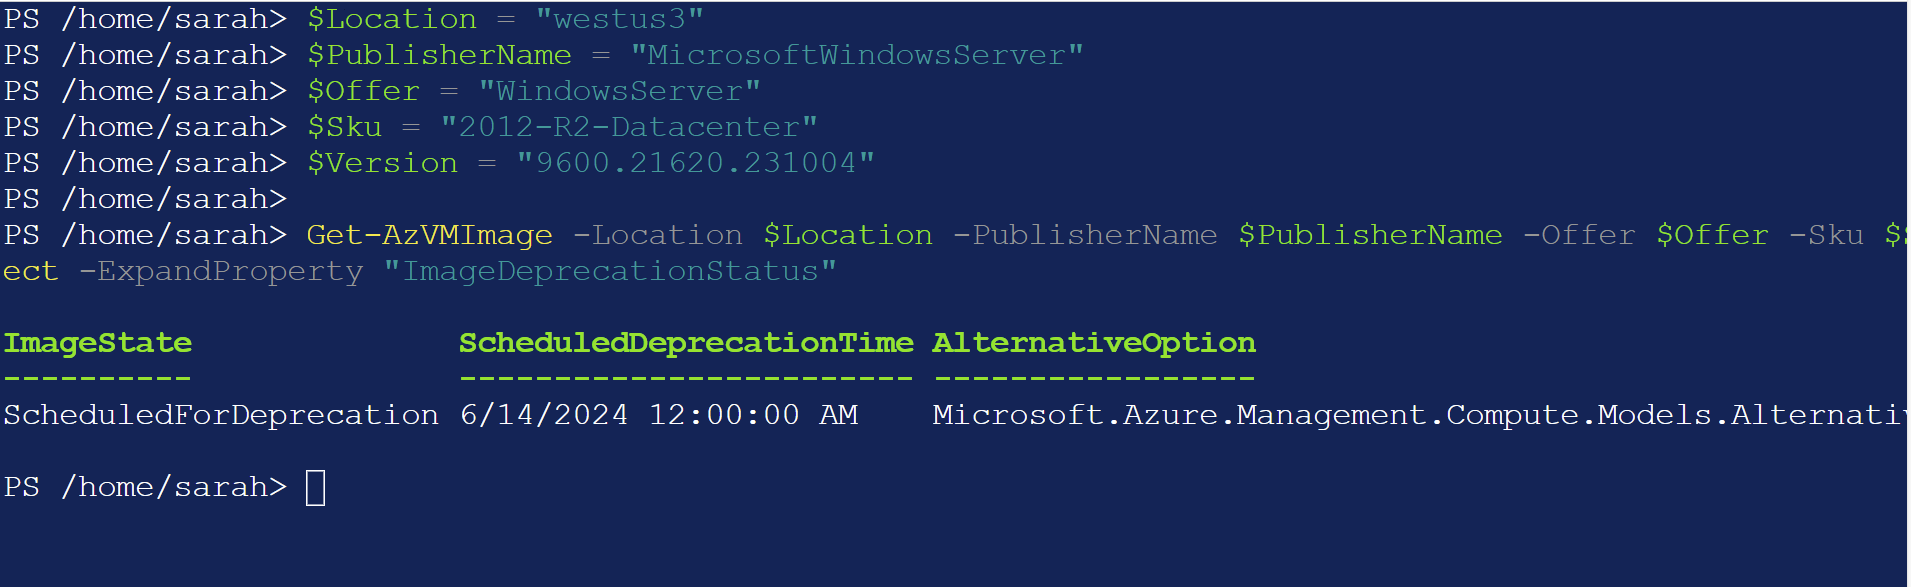 How to check if an Azure Marketplace image is marked for deprecation